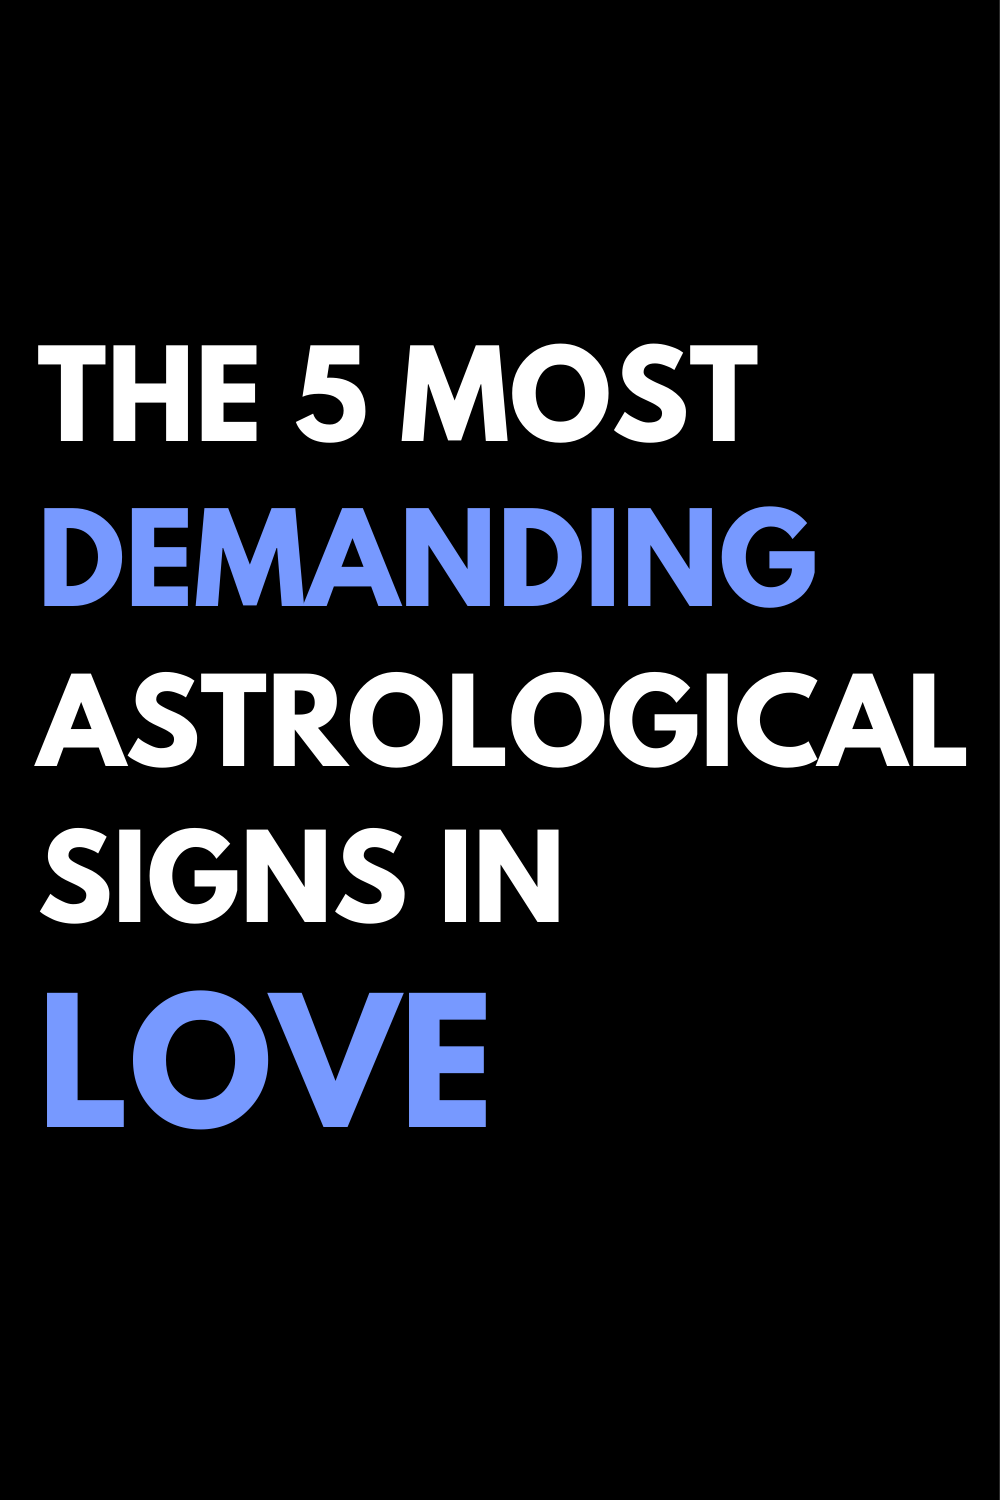 The 5 most demanding astrological signs in love